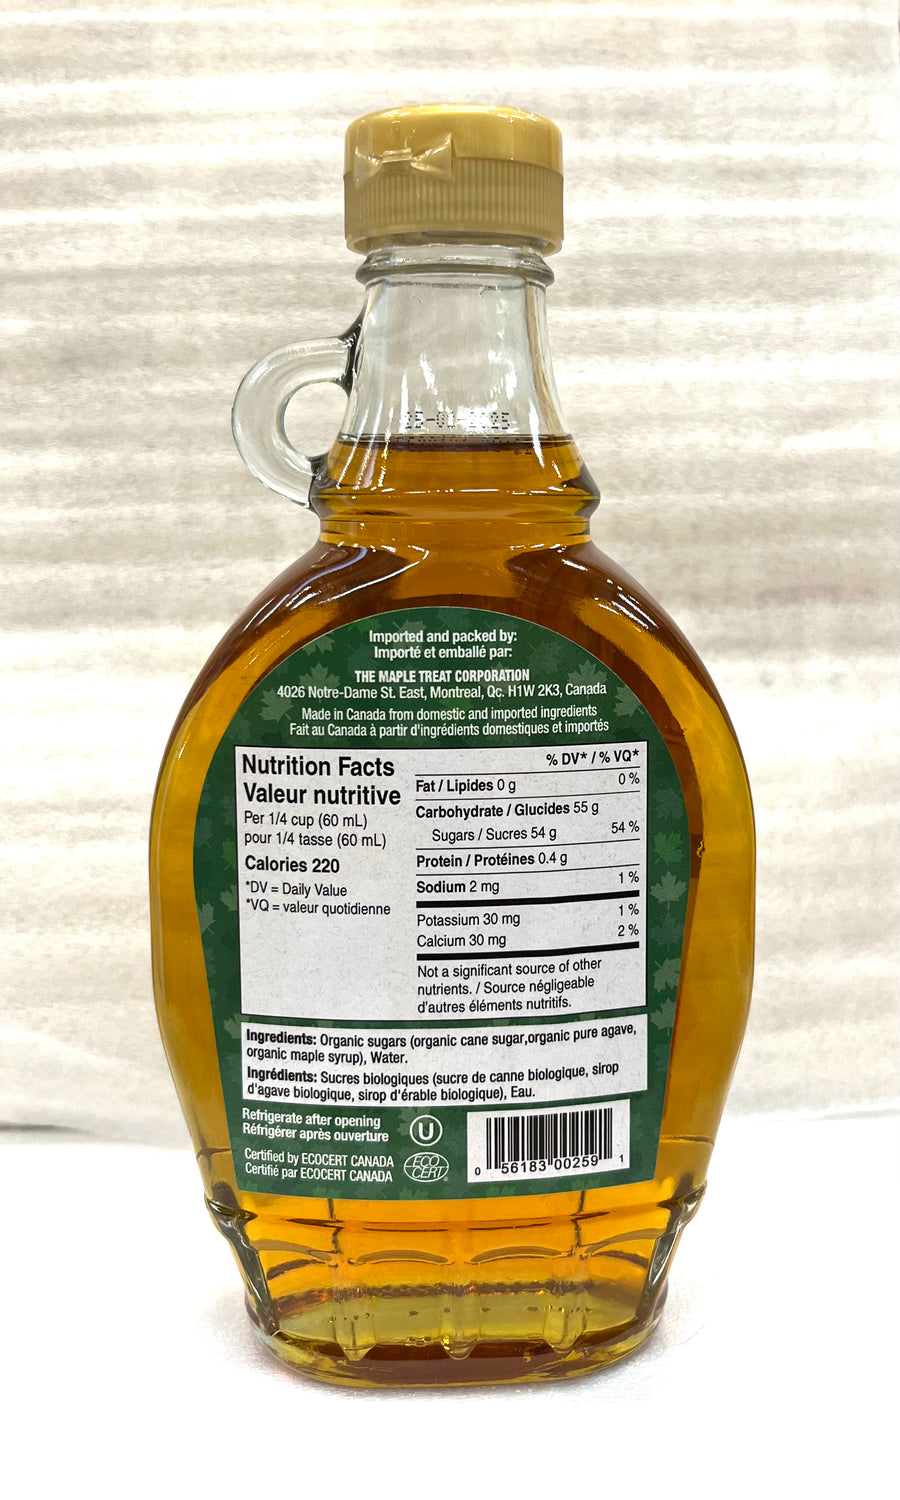 Organic Agave Maple Syrup